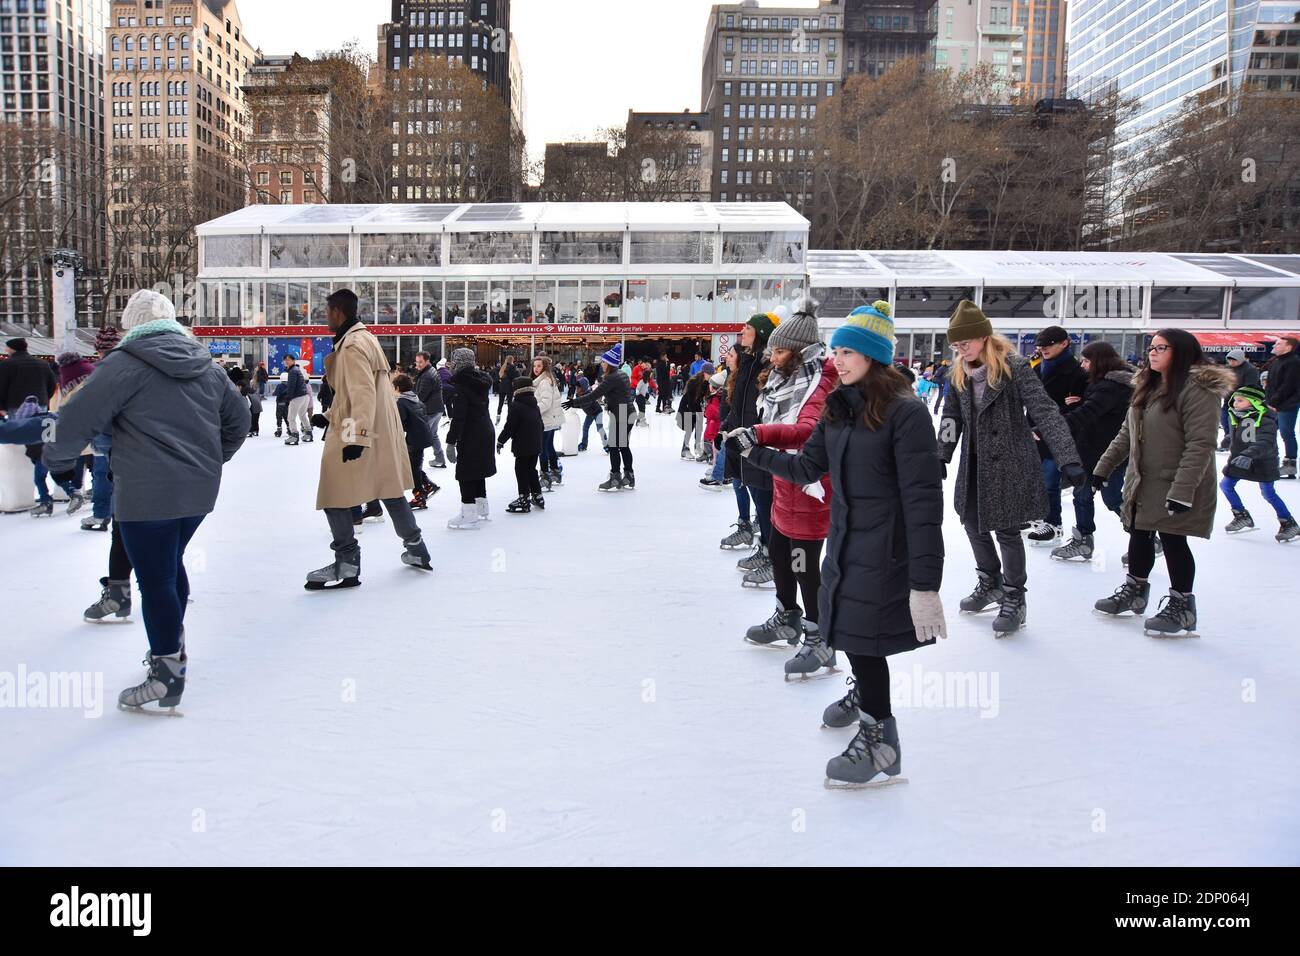 Manhattan, New York City, United States - December 10, 2019. Crowd of people on the Ice Skating Rink at Bryant Park Winter Village during the holidays Stock Photo